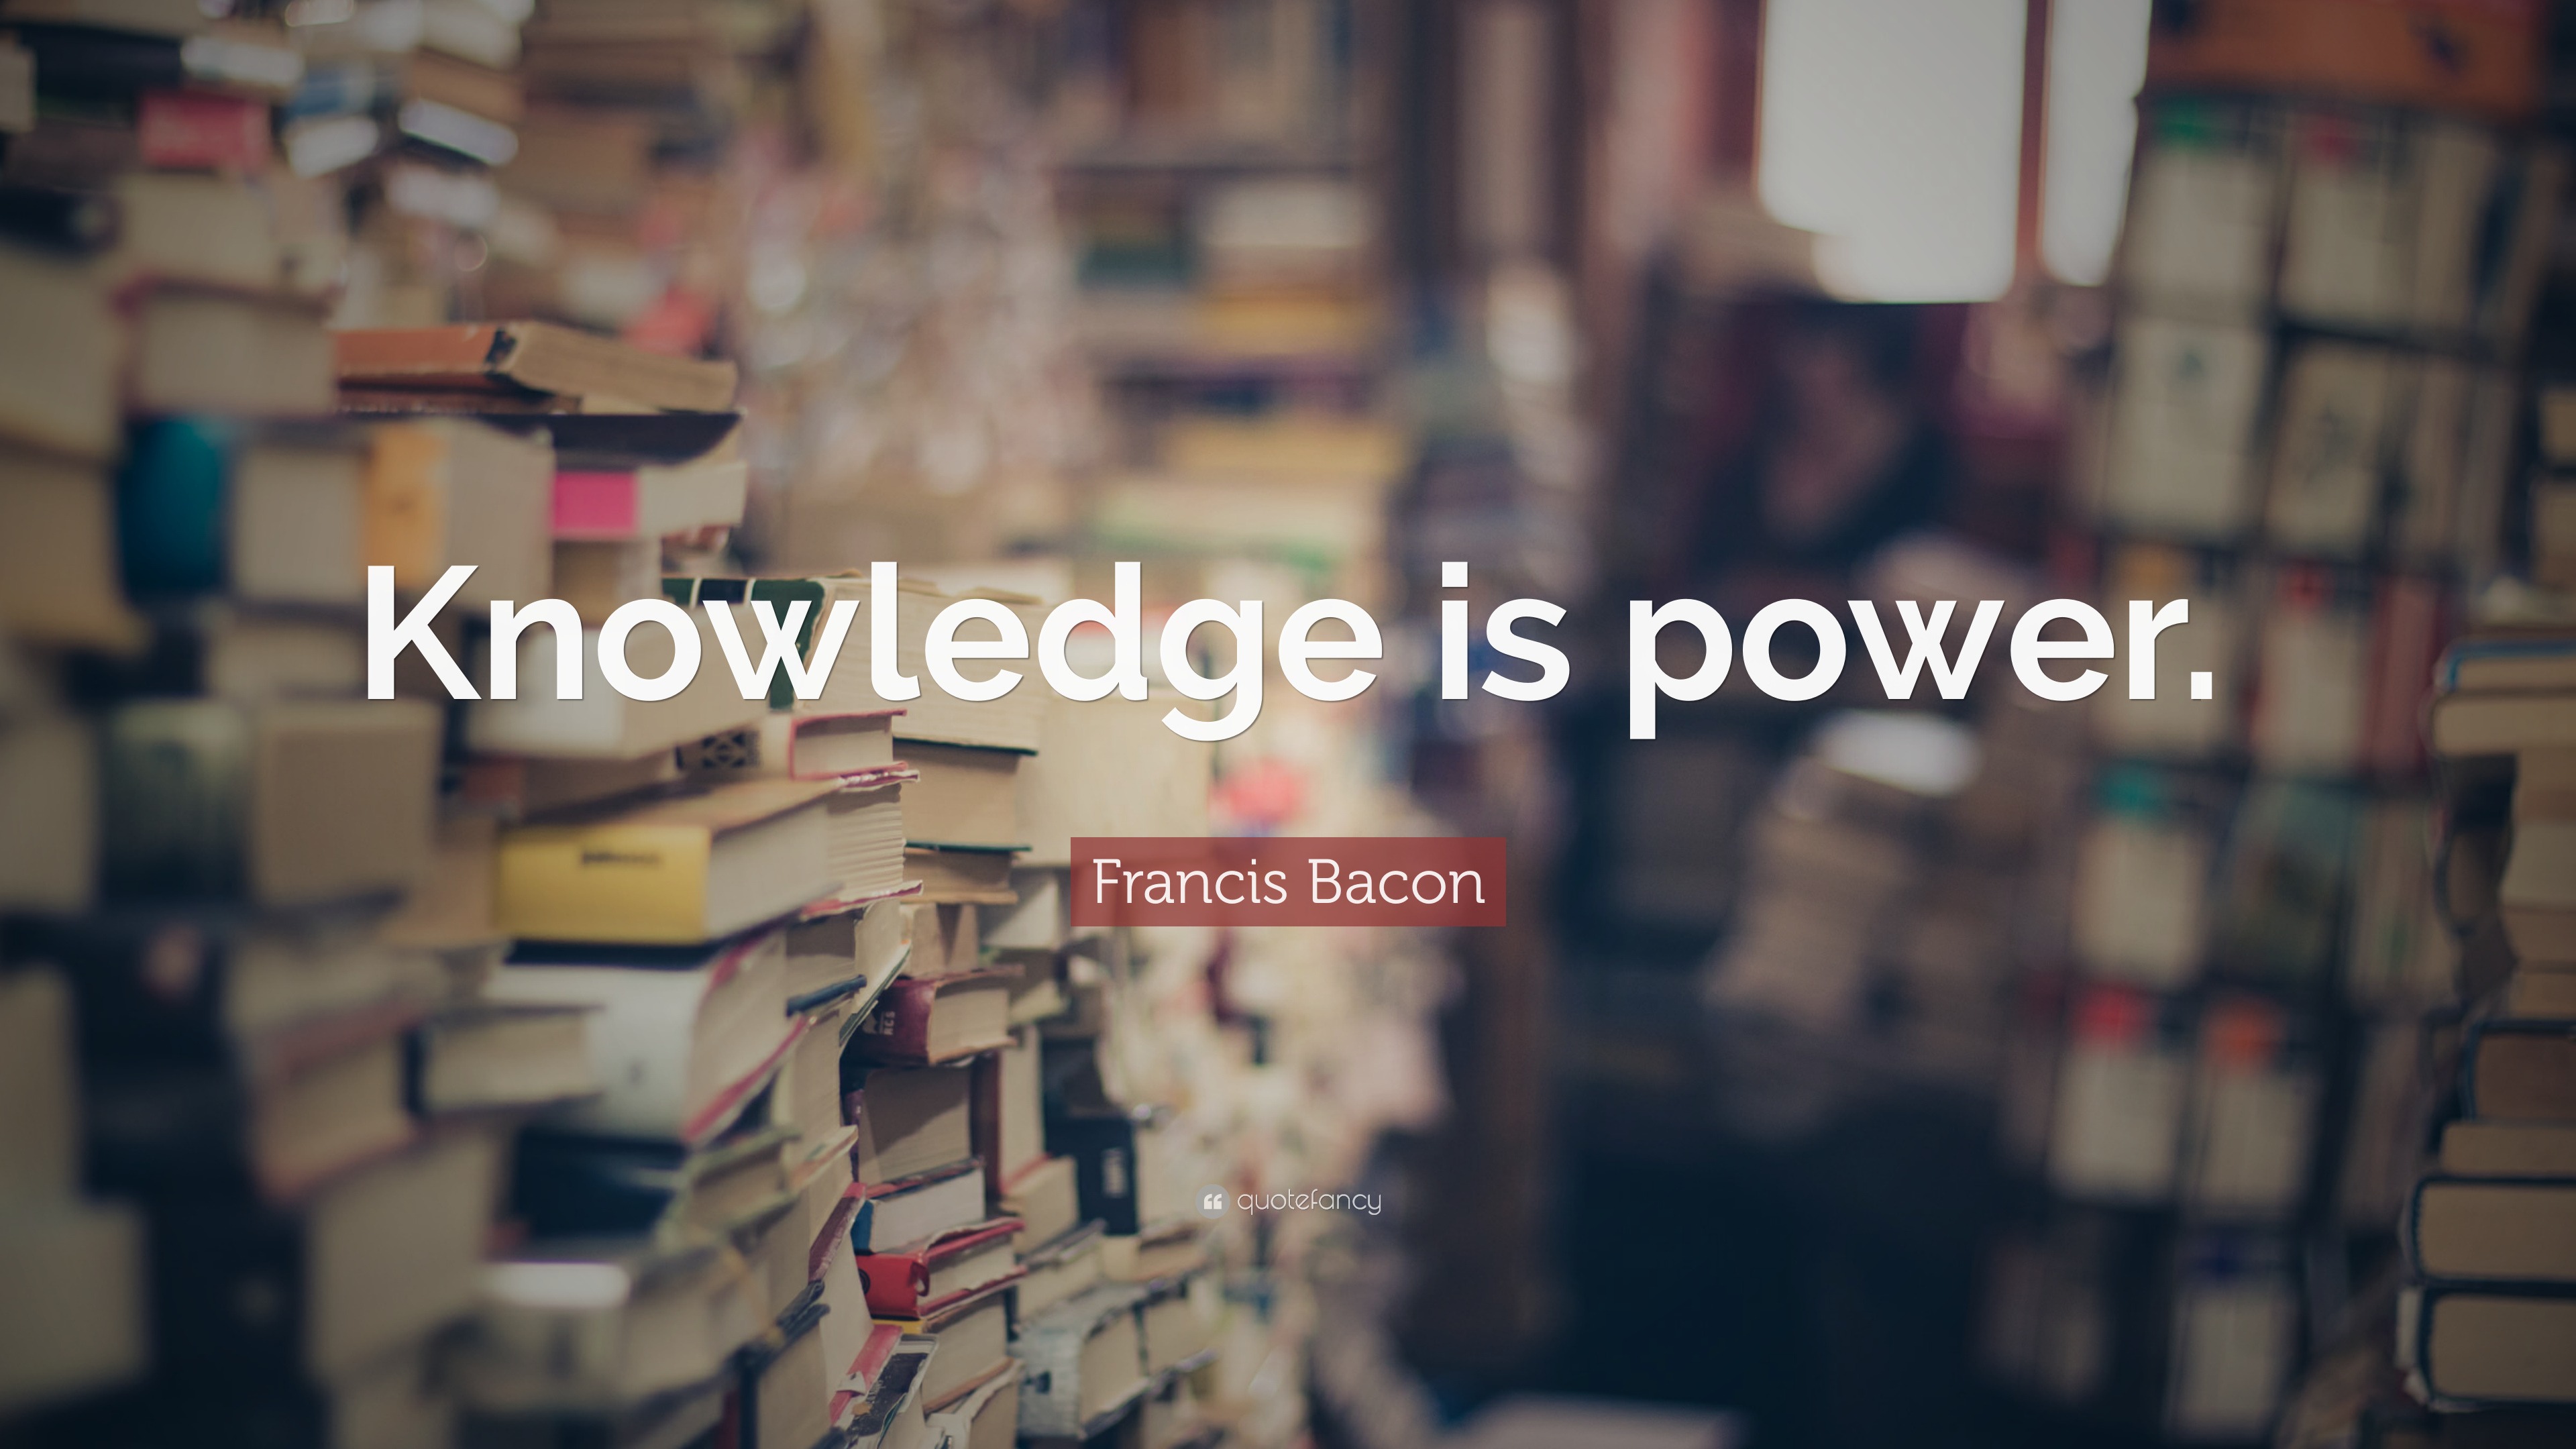 Francis Bacon Quote: “Knowledge is power.”